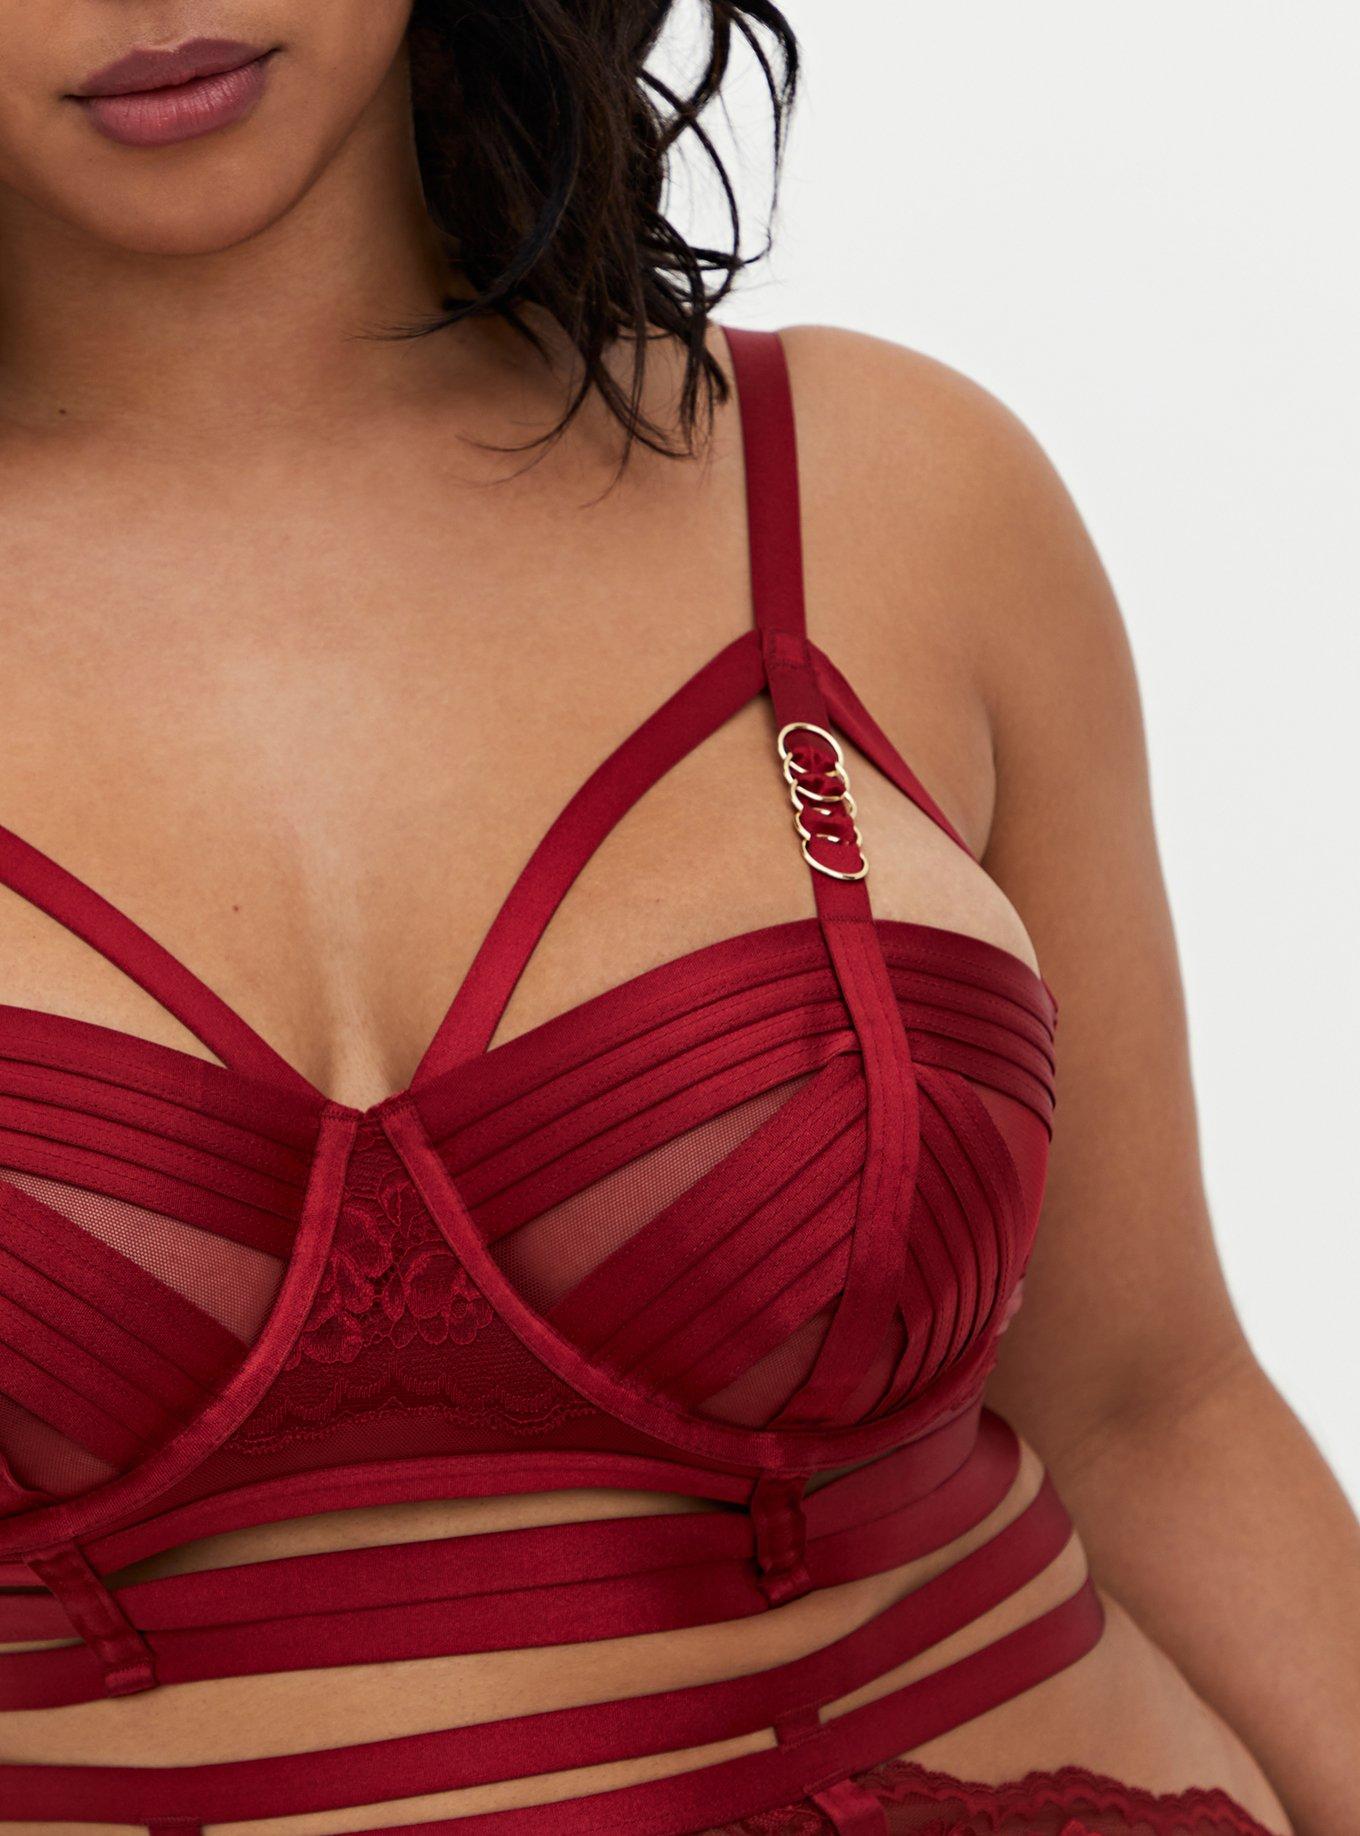 Plus Size - Straps And Rings Satin Underwire Bra With Mesh Cup - Torrid